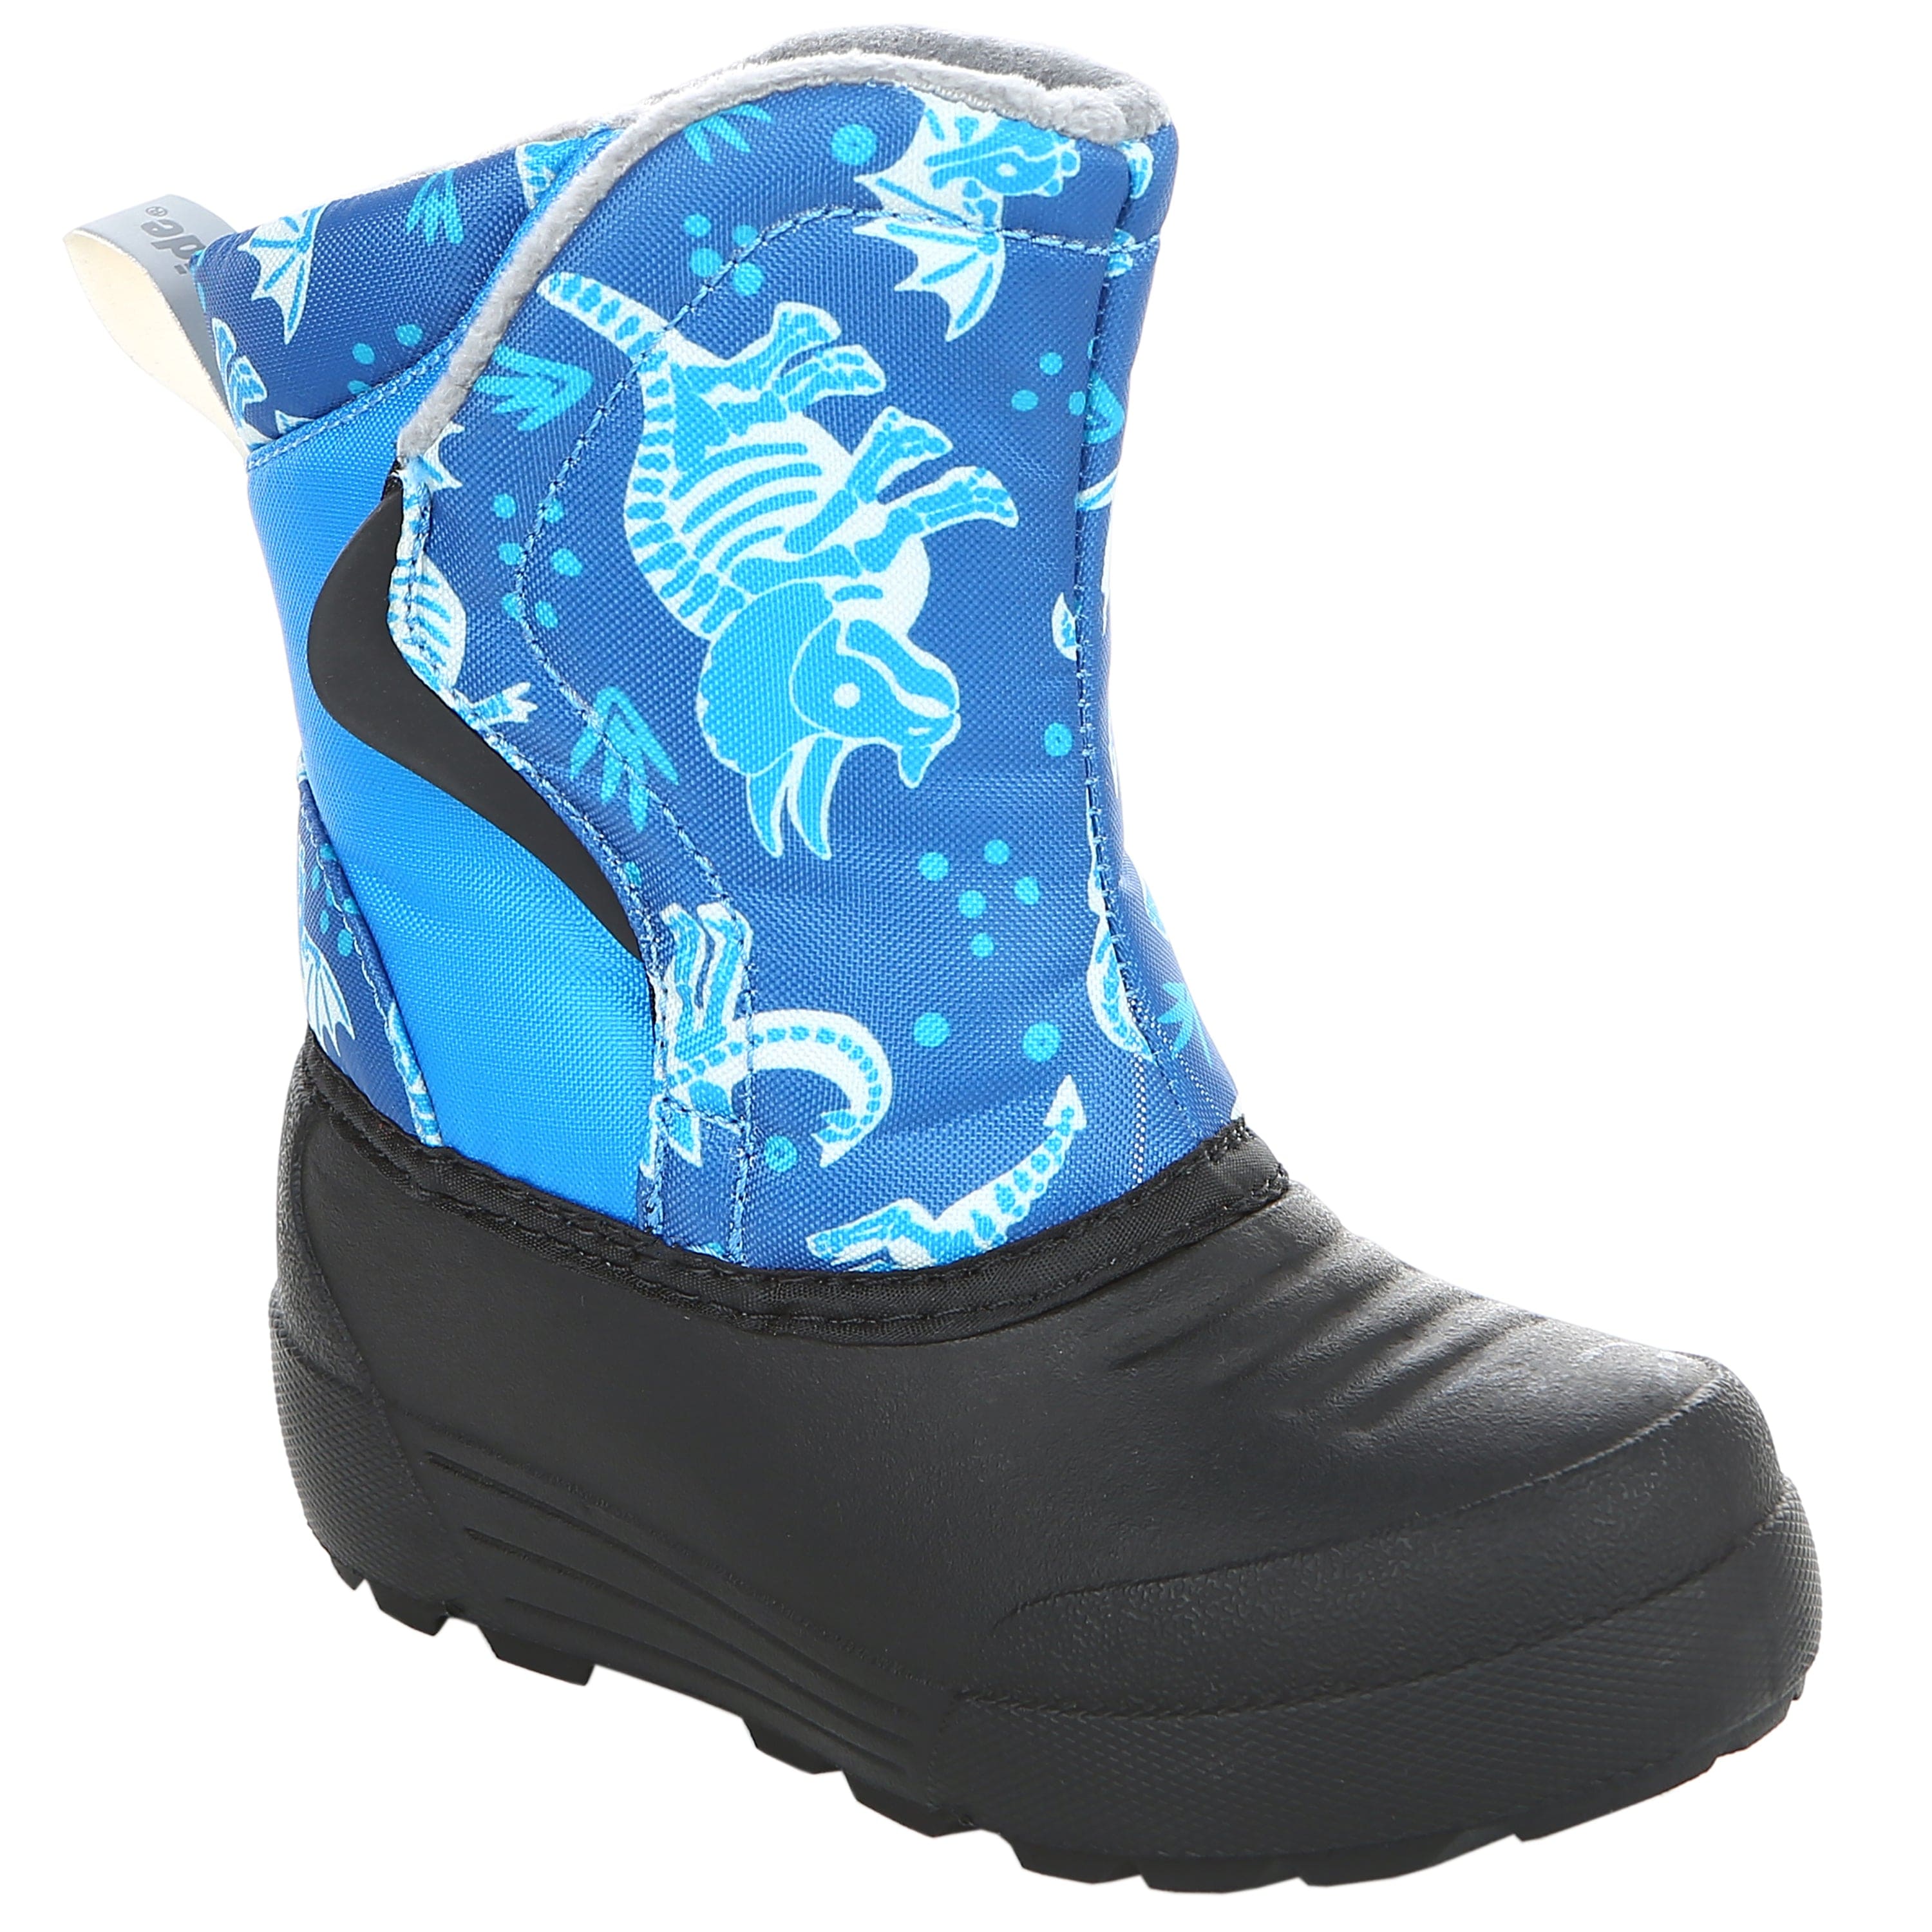 Toddler's Flurrie Insulated Winter Snow Boot